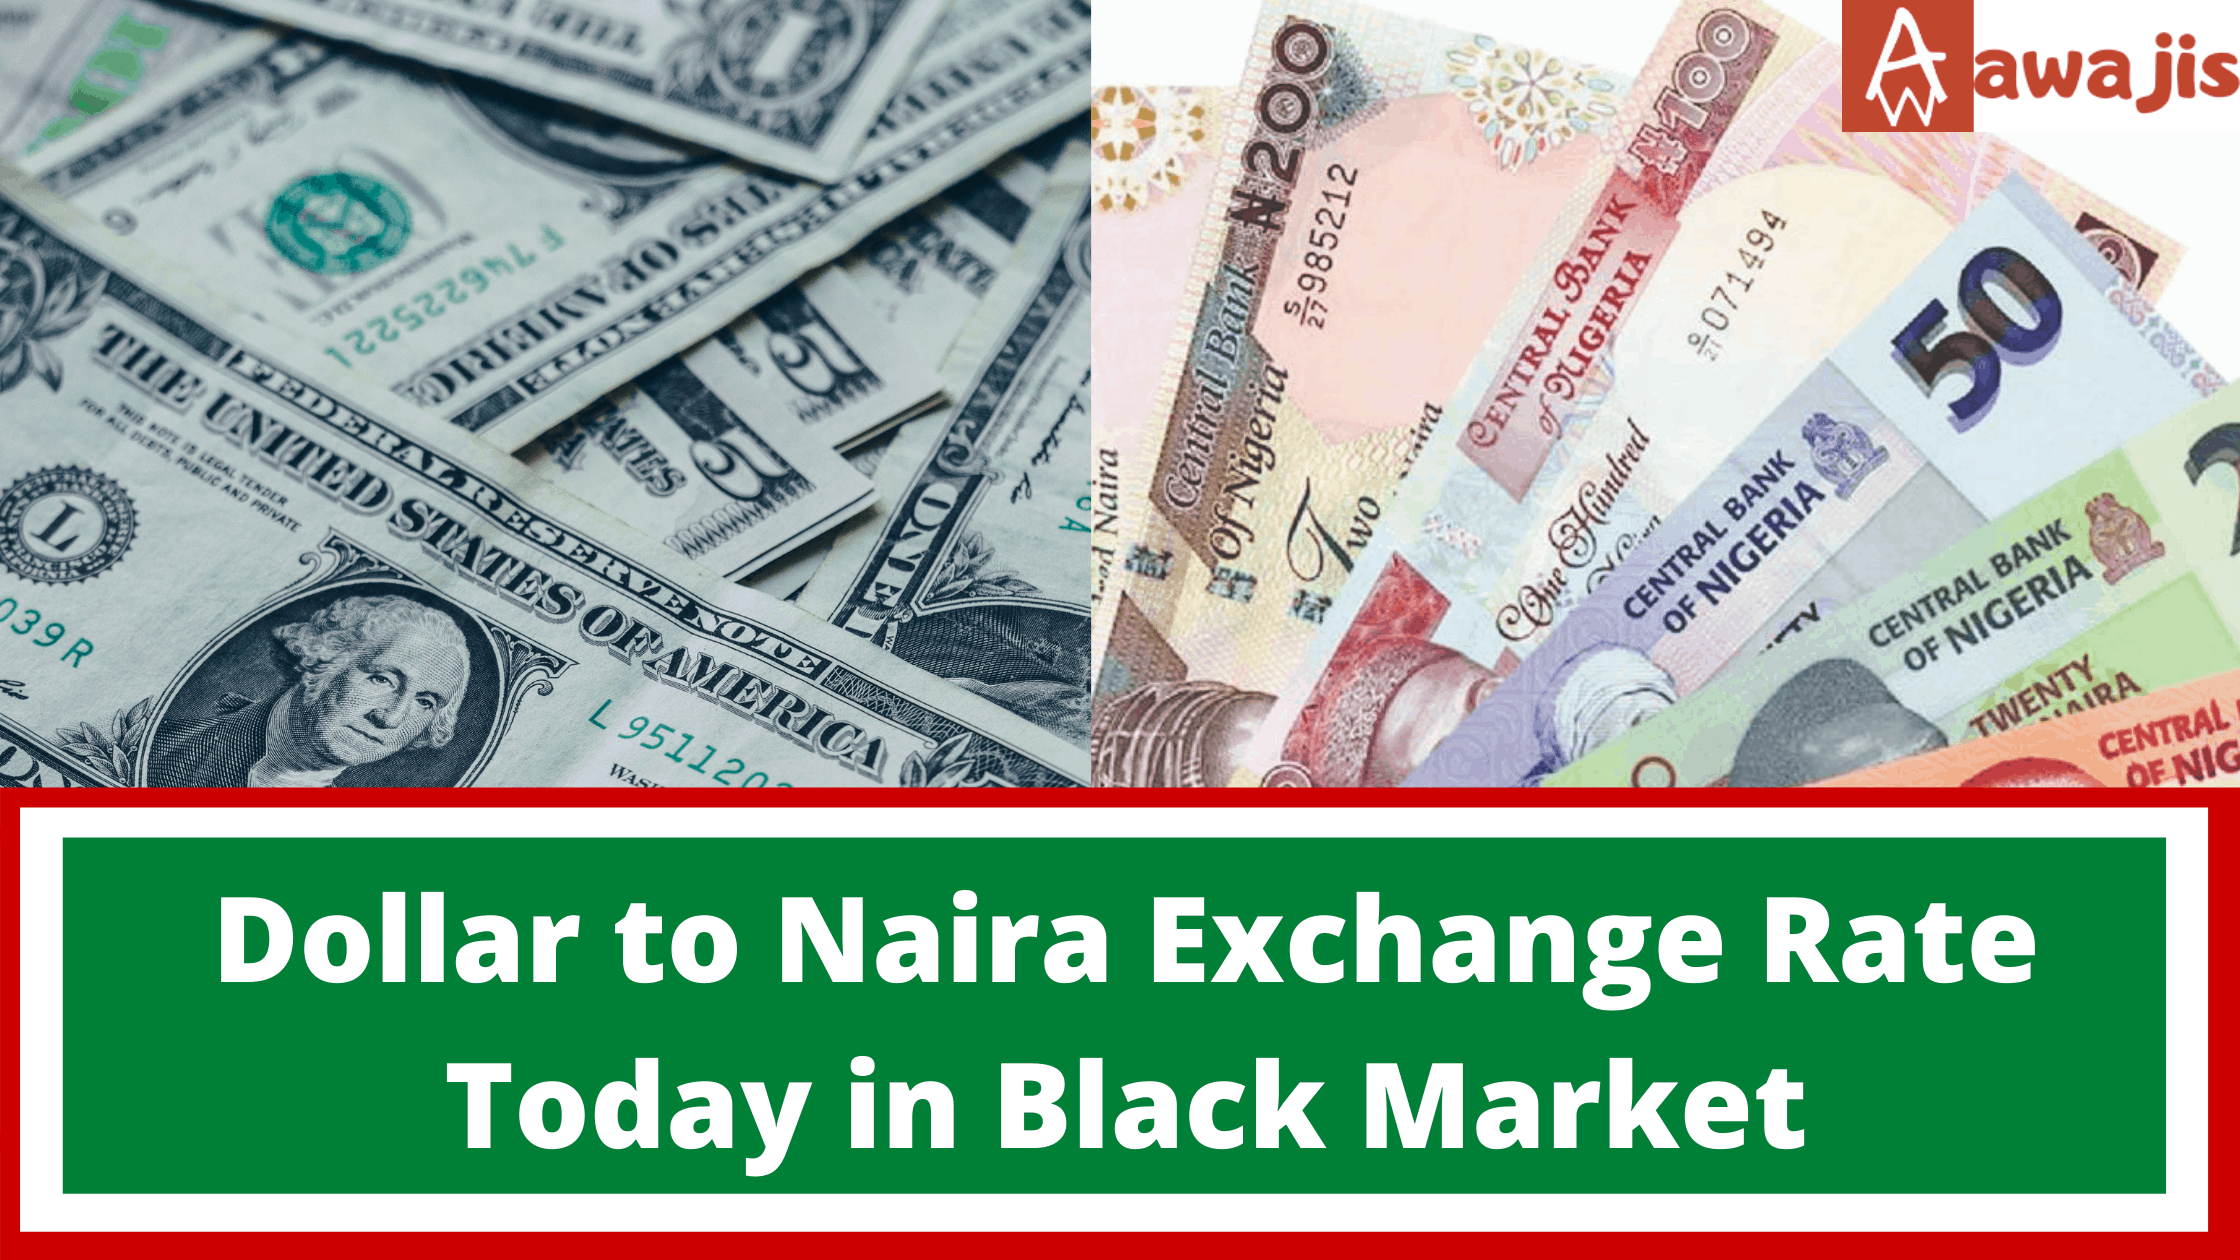 Dollar to Naira Exchange Rate Today in Black Market